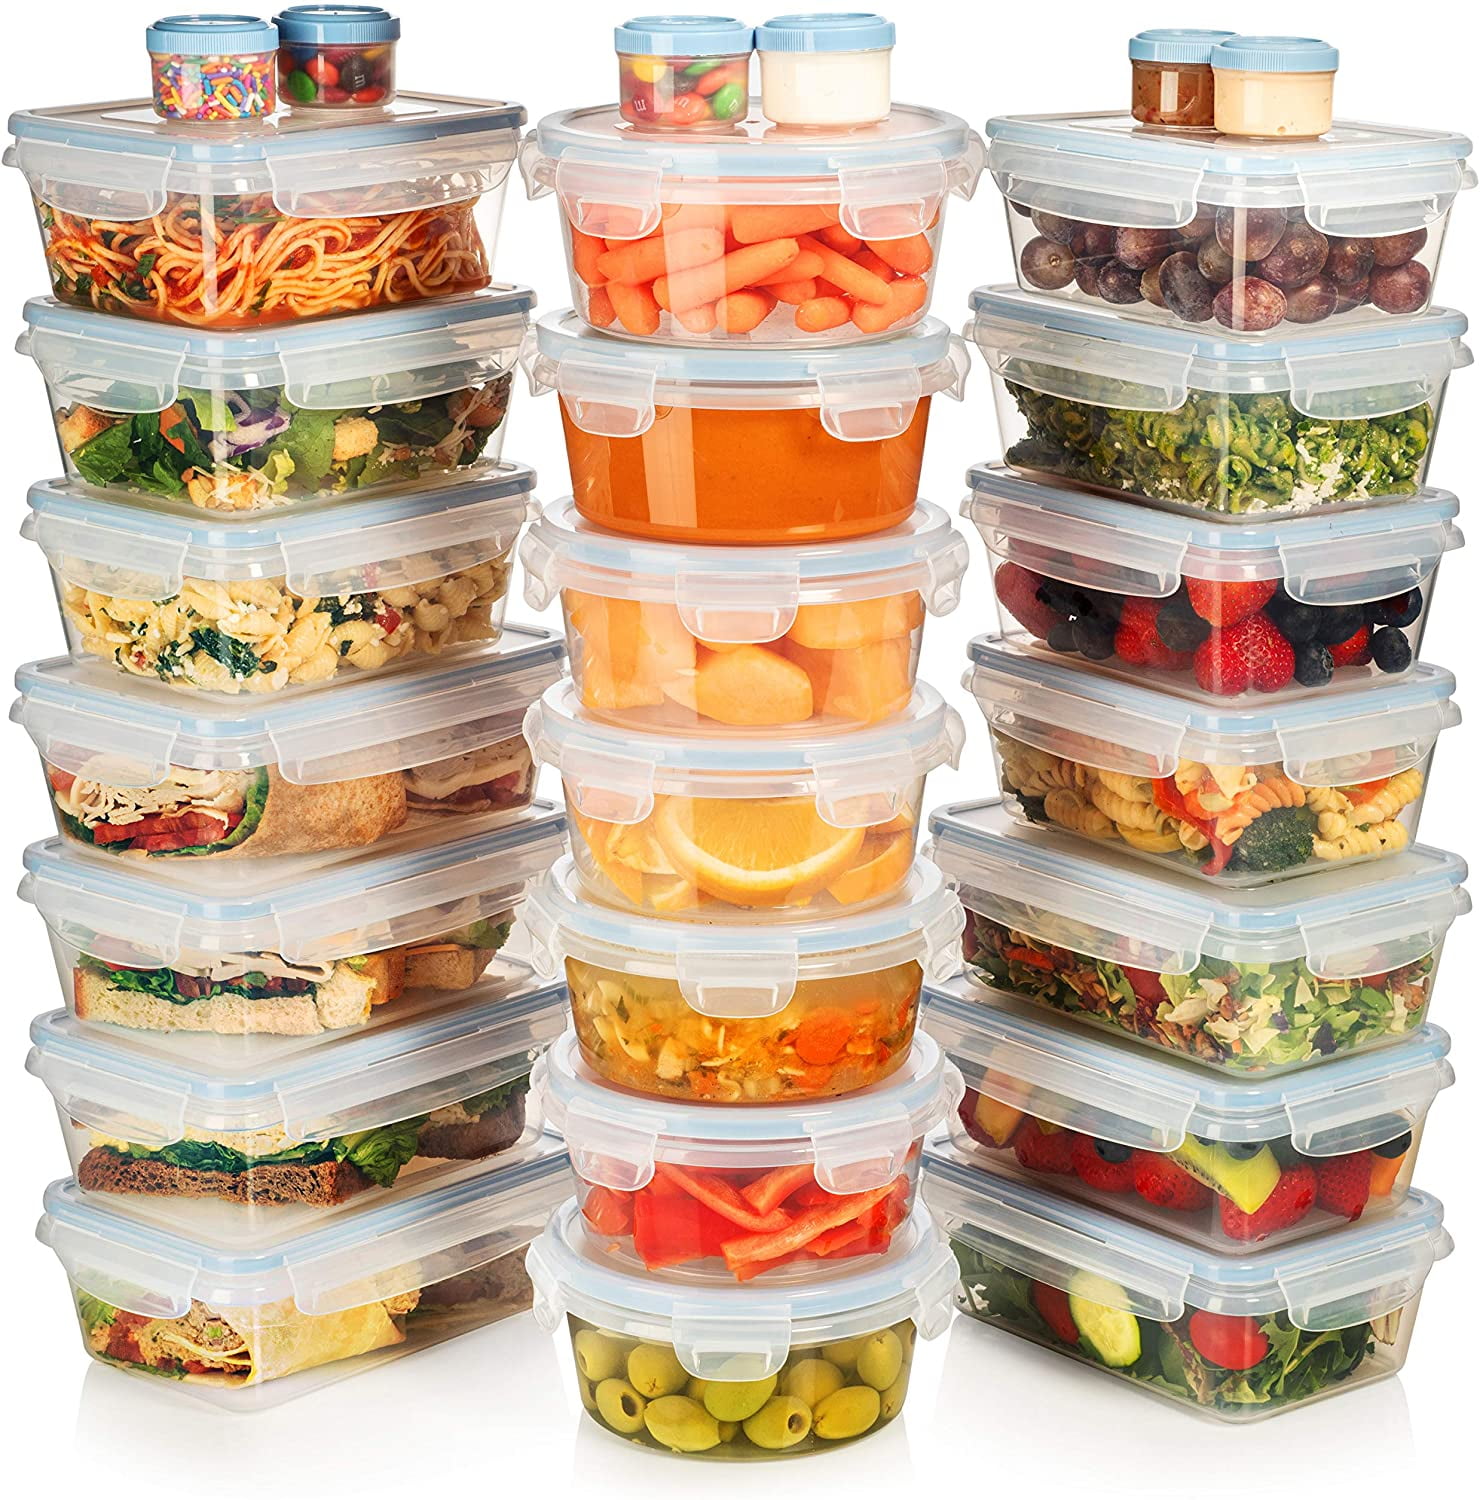 Shazo Huge Set 54 Pack Food Storage Containers with Airtight Lids, 27 containers+27 Lids, Meal Prep Snap Lids Lunch/Bento Box - BPA Free Freezer